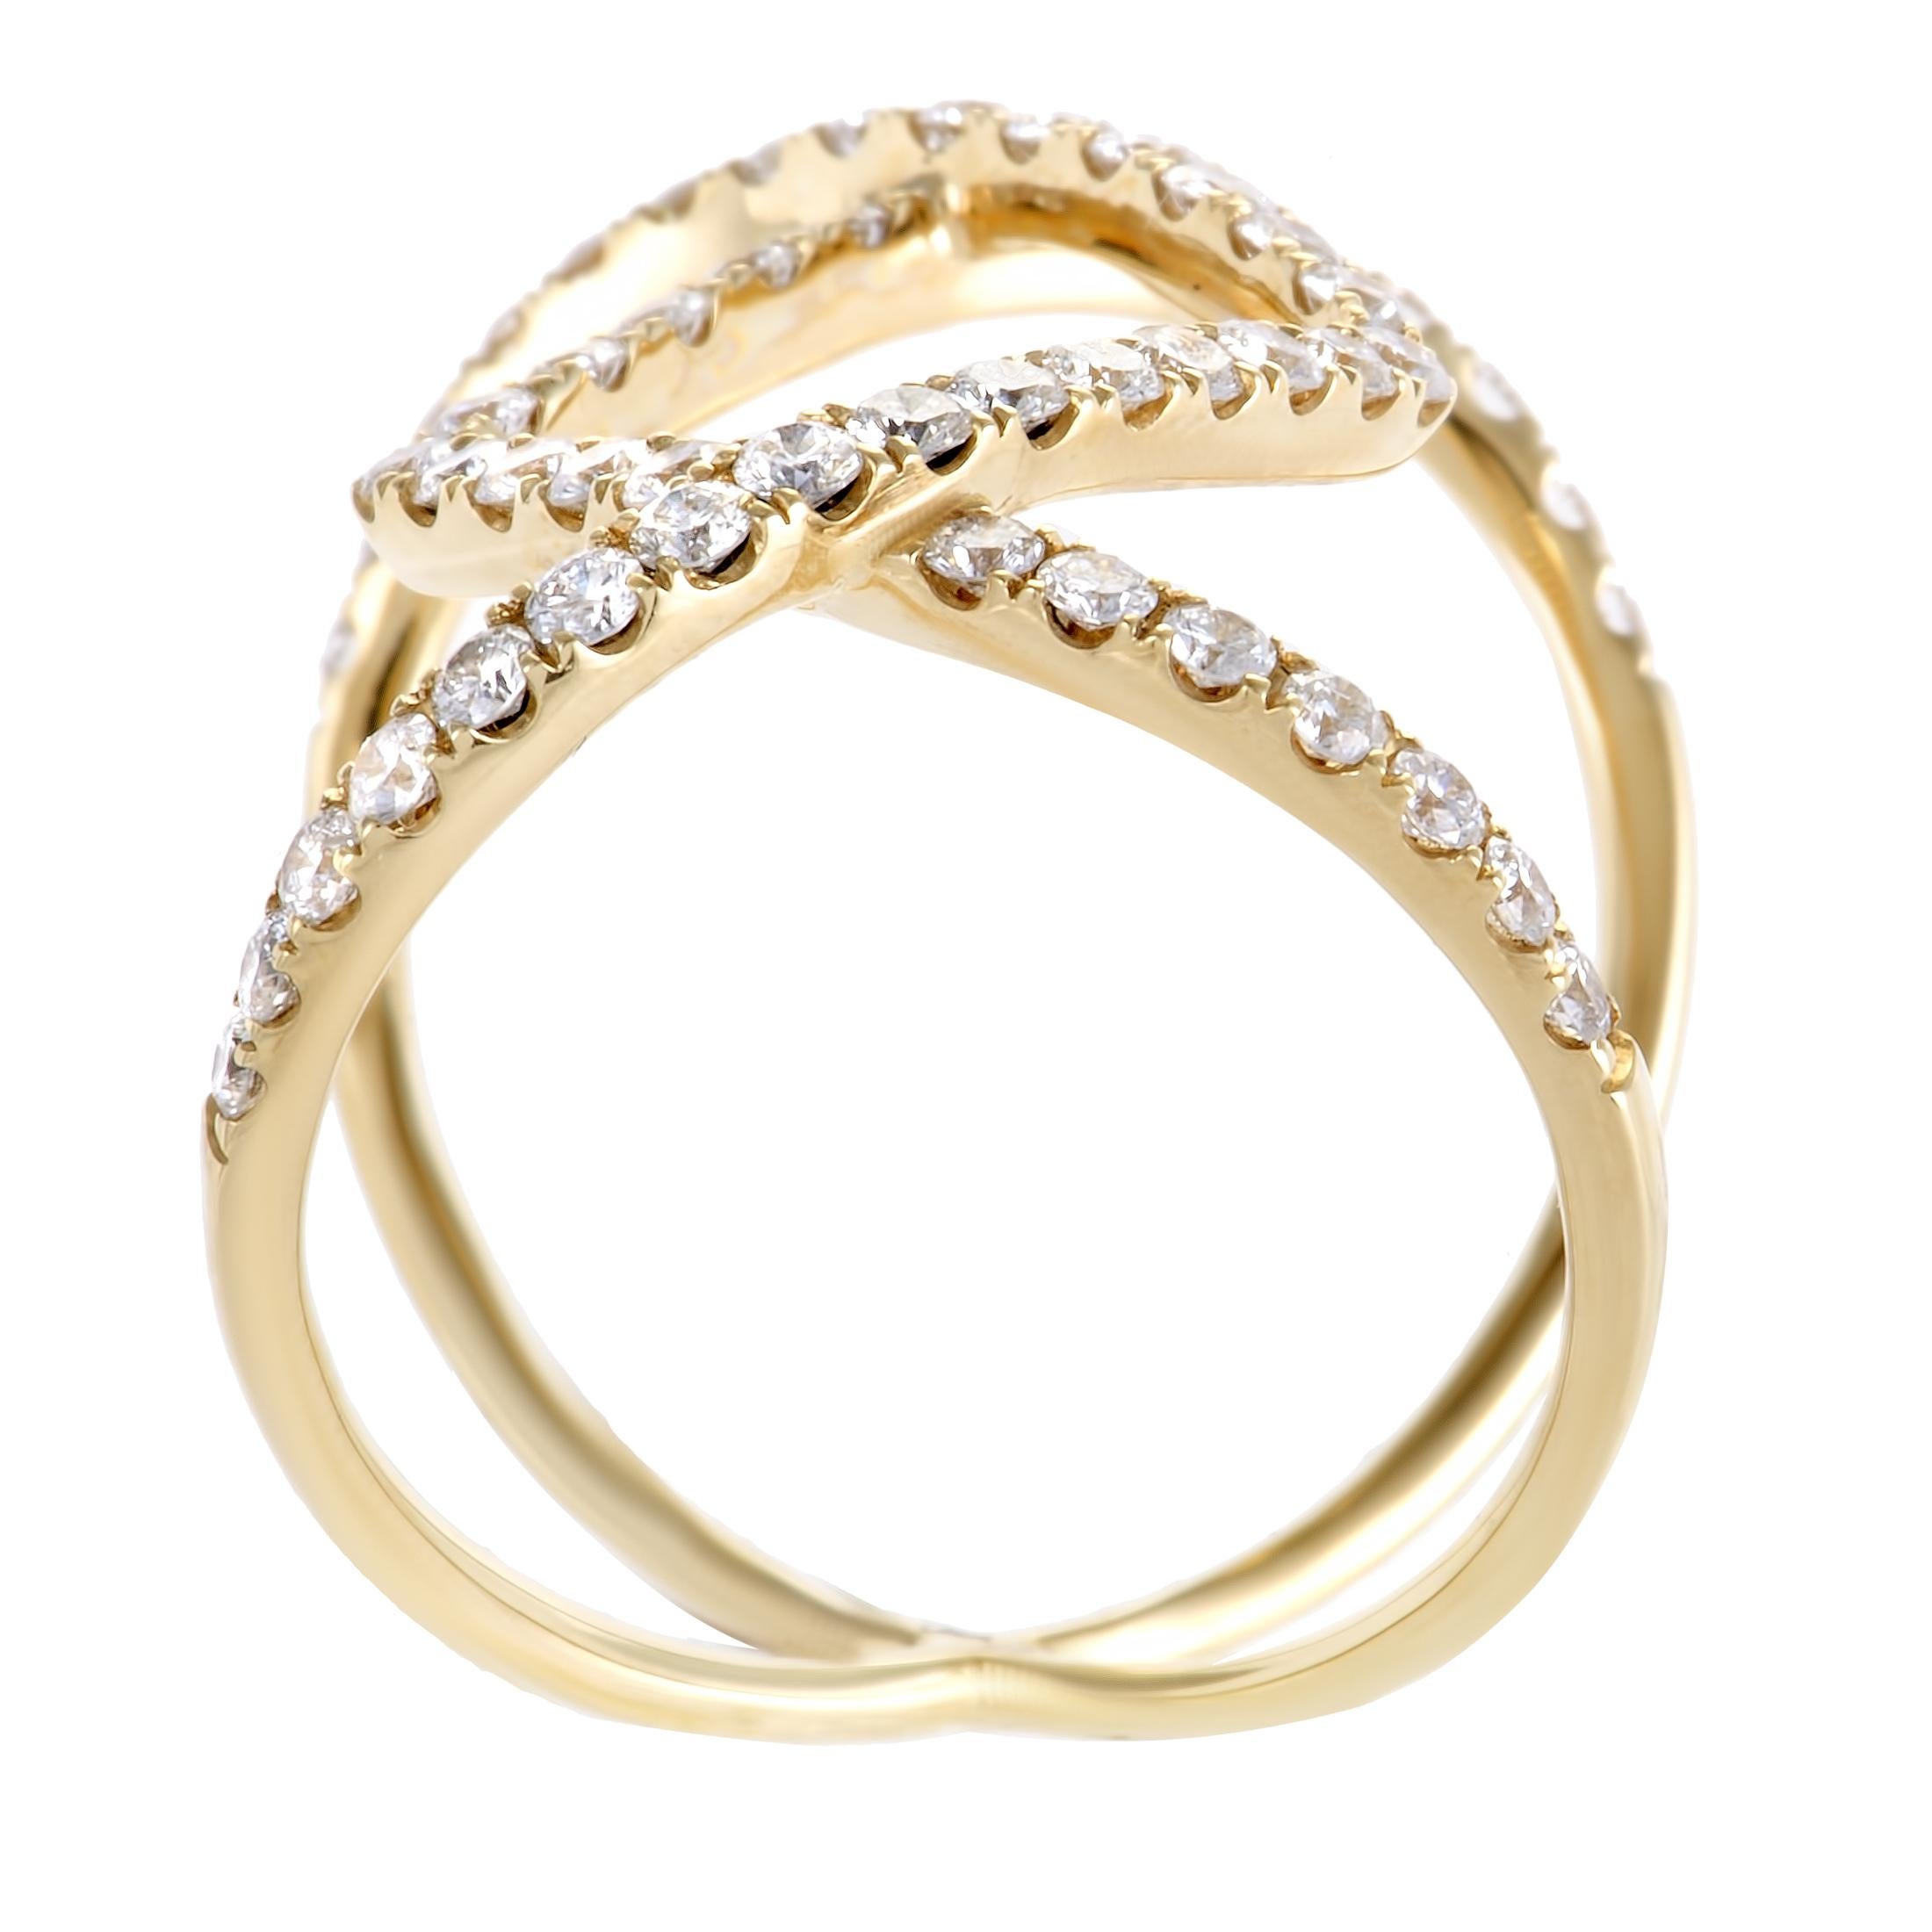 Strikingly offbeat and incredibly luxurious, this sublime ring presented by  boasts exceptional craftsmanship and endearing décor, offering eye-catching refined appearance. The ring is made of radiant 18K yellow gold and it is set with 1.07 carats